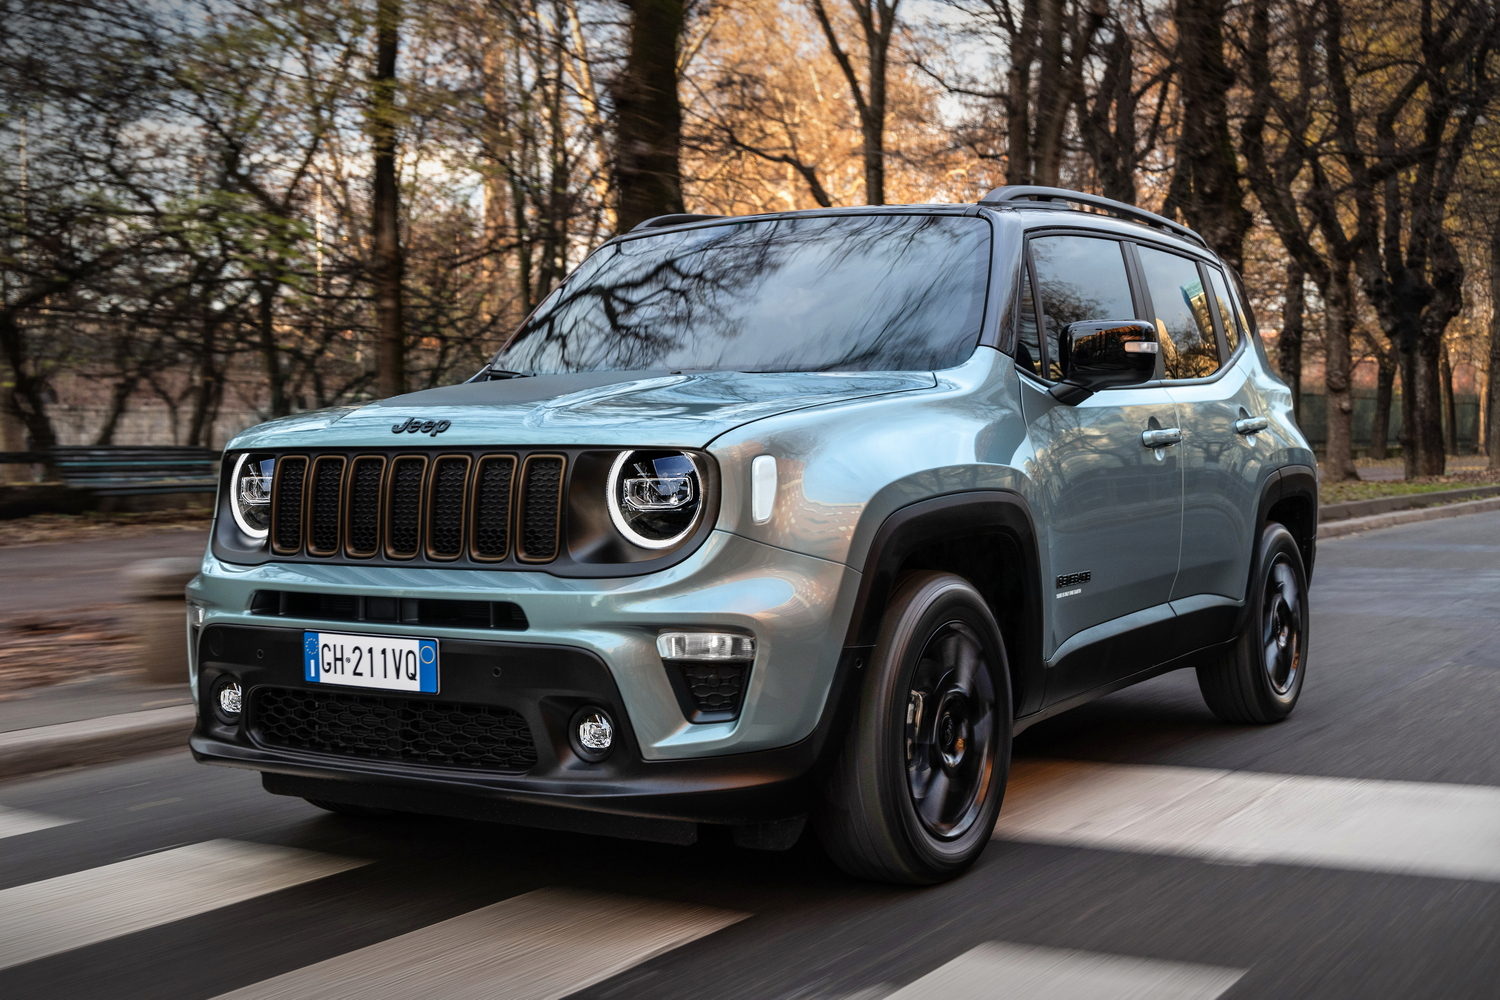 Jeep adds e-Hybrid power to Renegade and Compass SUV ranges. Image by Jeep.